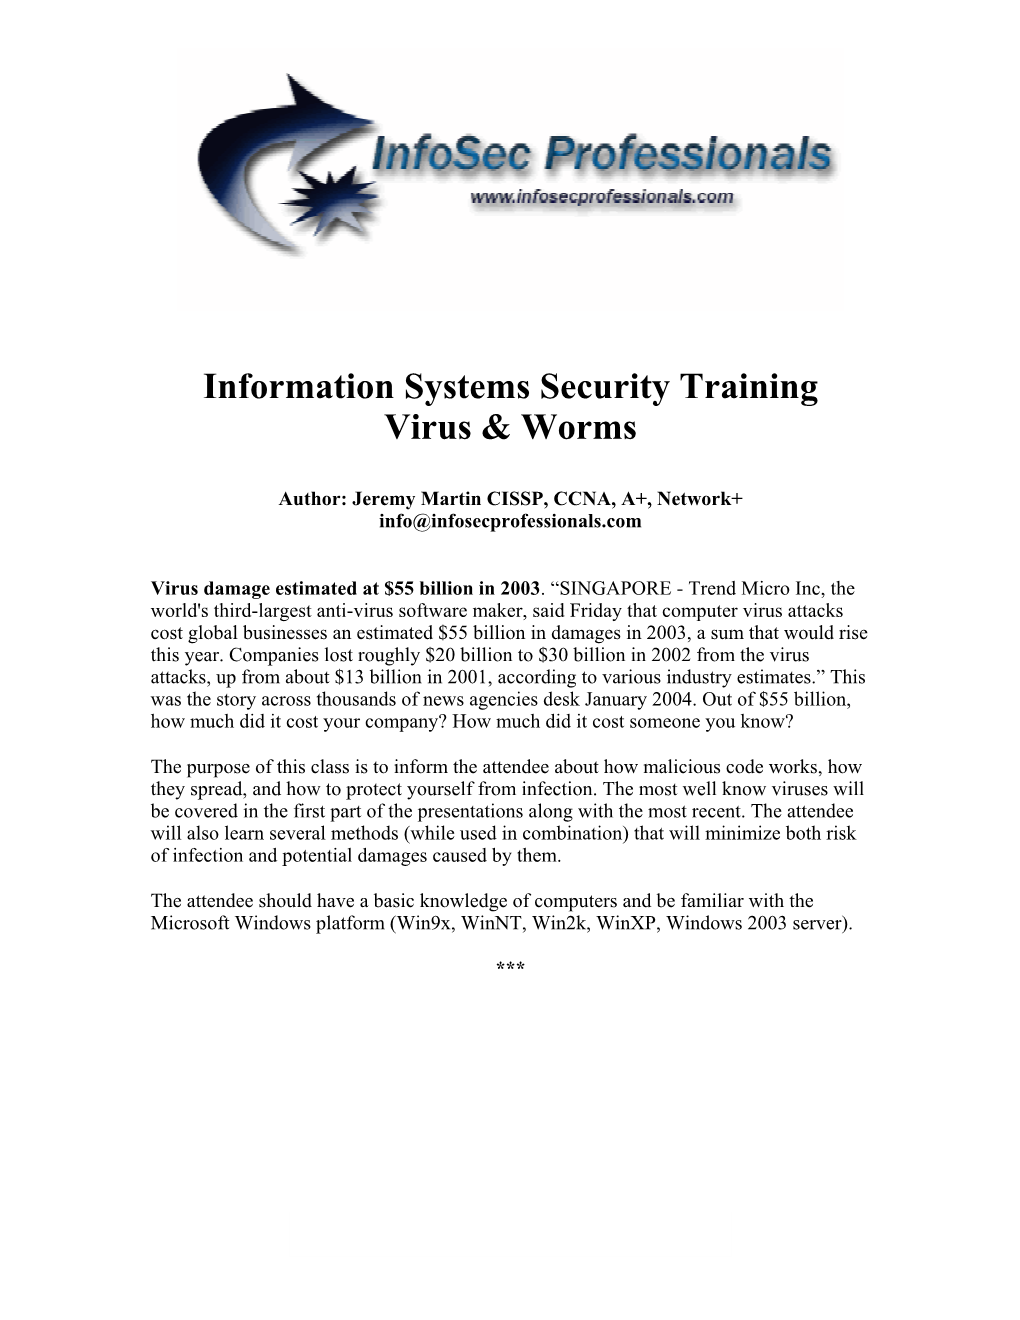 Information Systems Security Training Virus & Worms